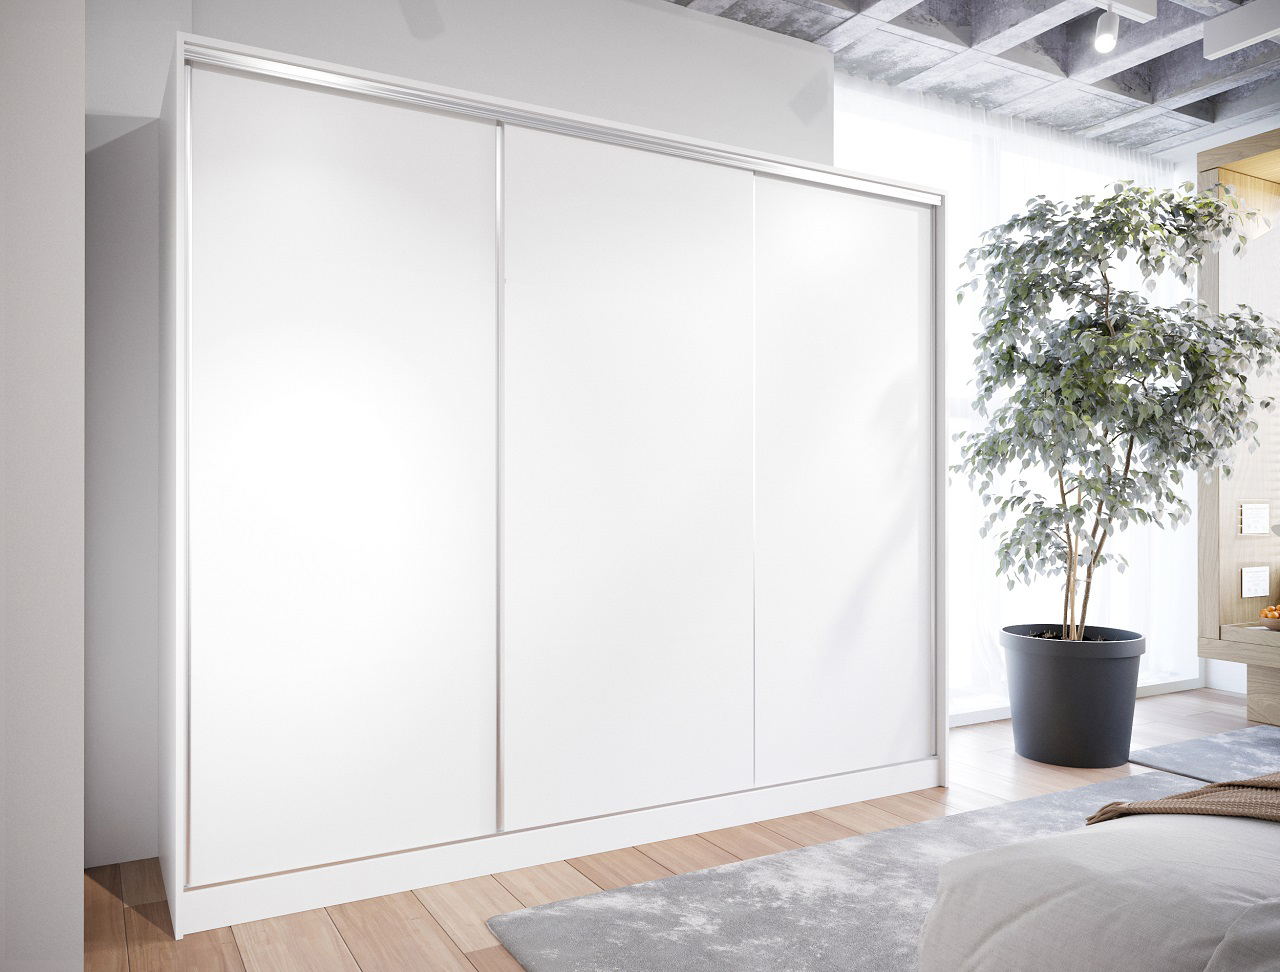 Sliding Wardrobe with Drawers BRITTO D 270 white